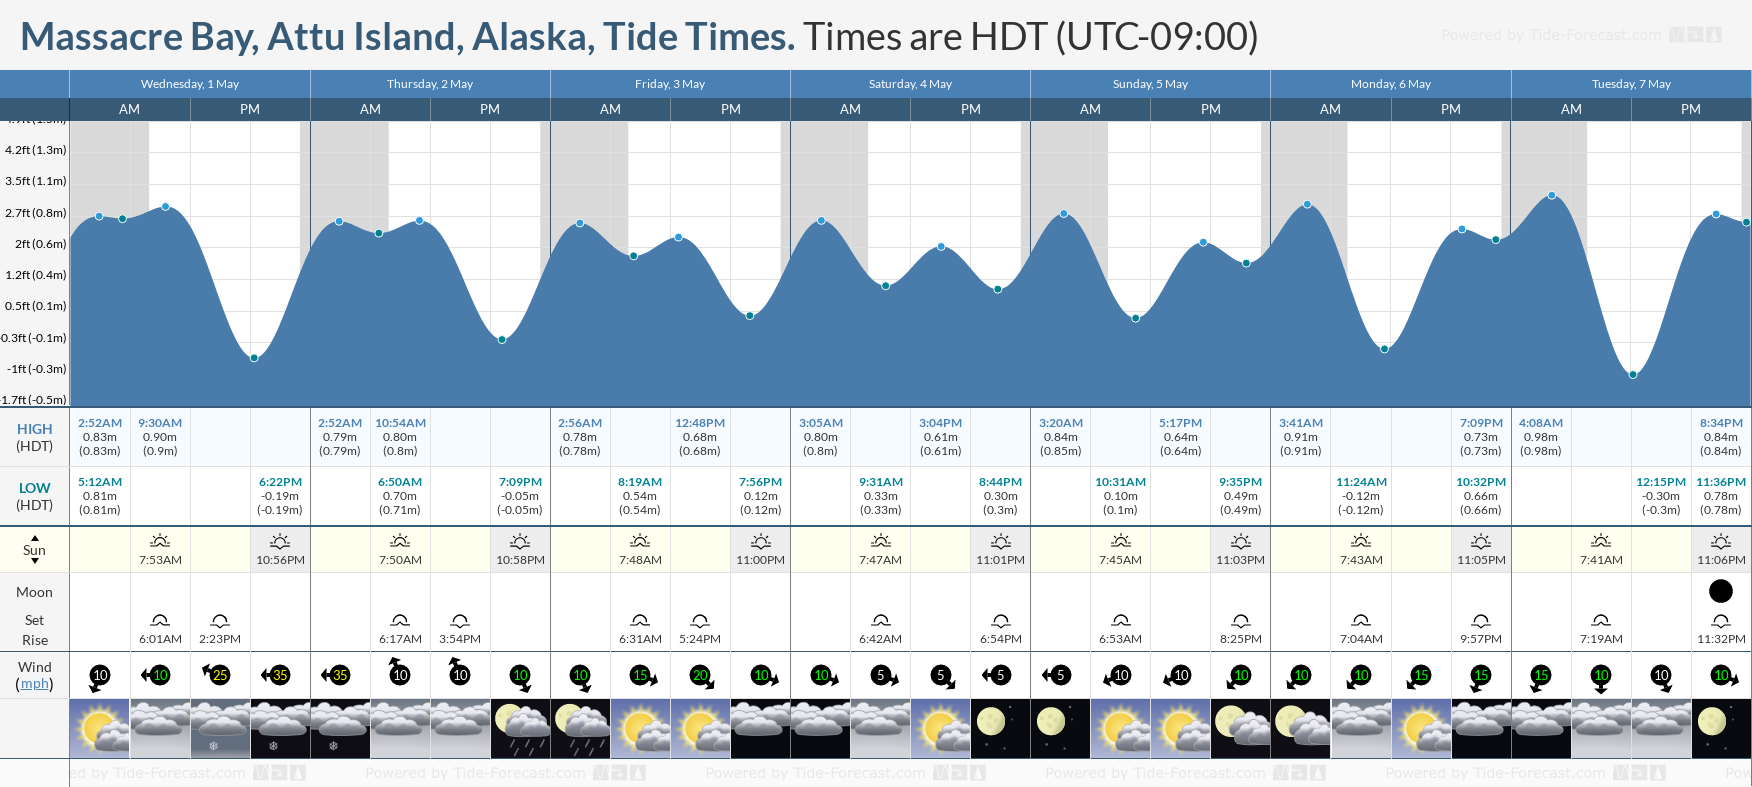 Massacre Bay, Attu Island, Alaska Tide Chart including high and low tide tide times for the next 7 days